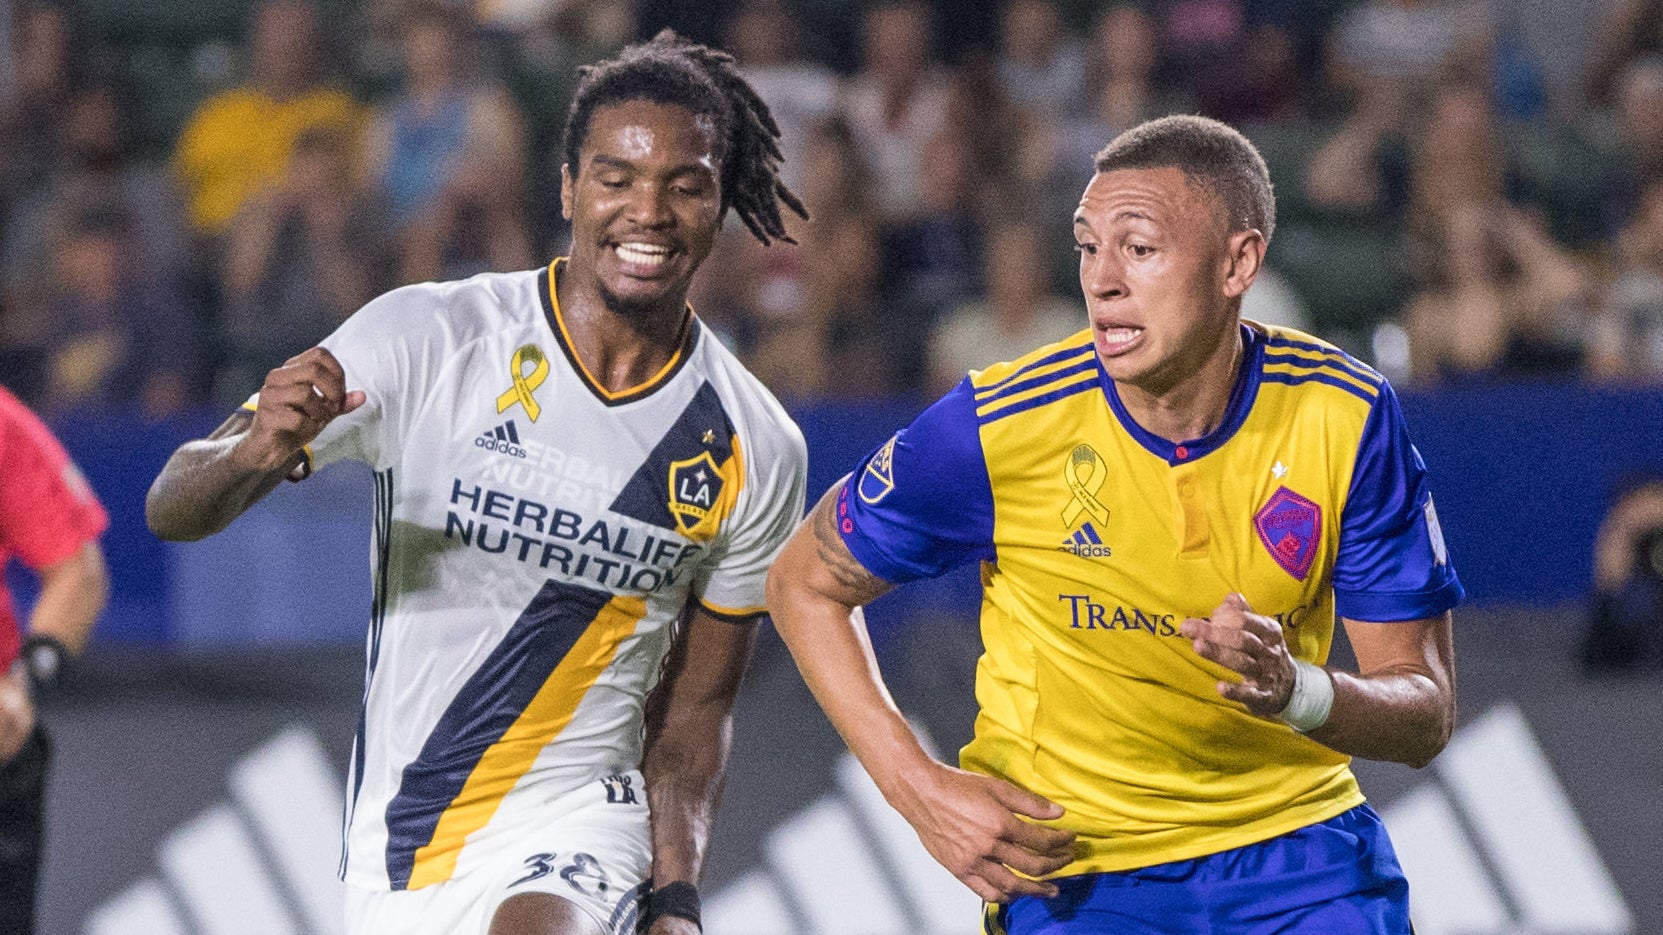 More Info for LA Galaxy match at StubHub Center against Colorado Rapids moved to Aug. 14